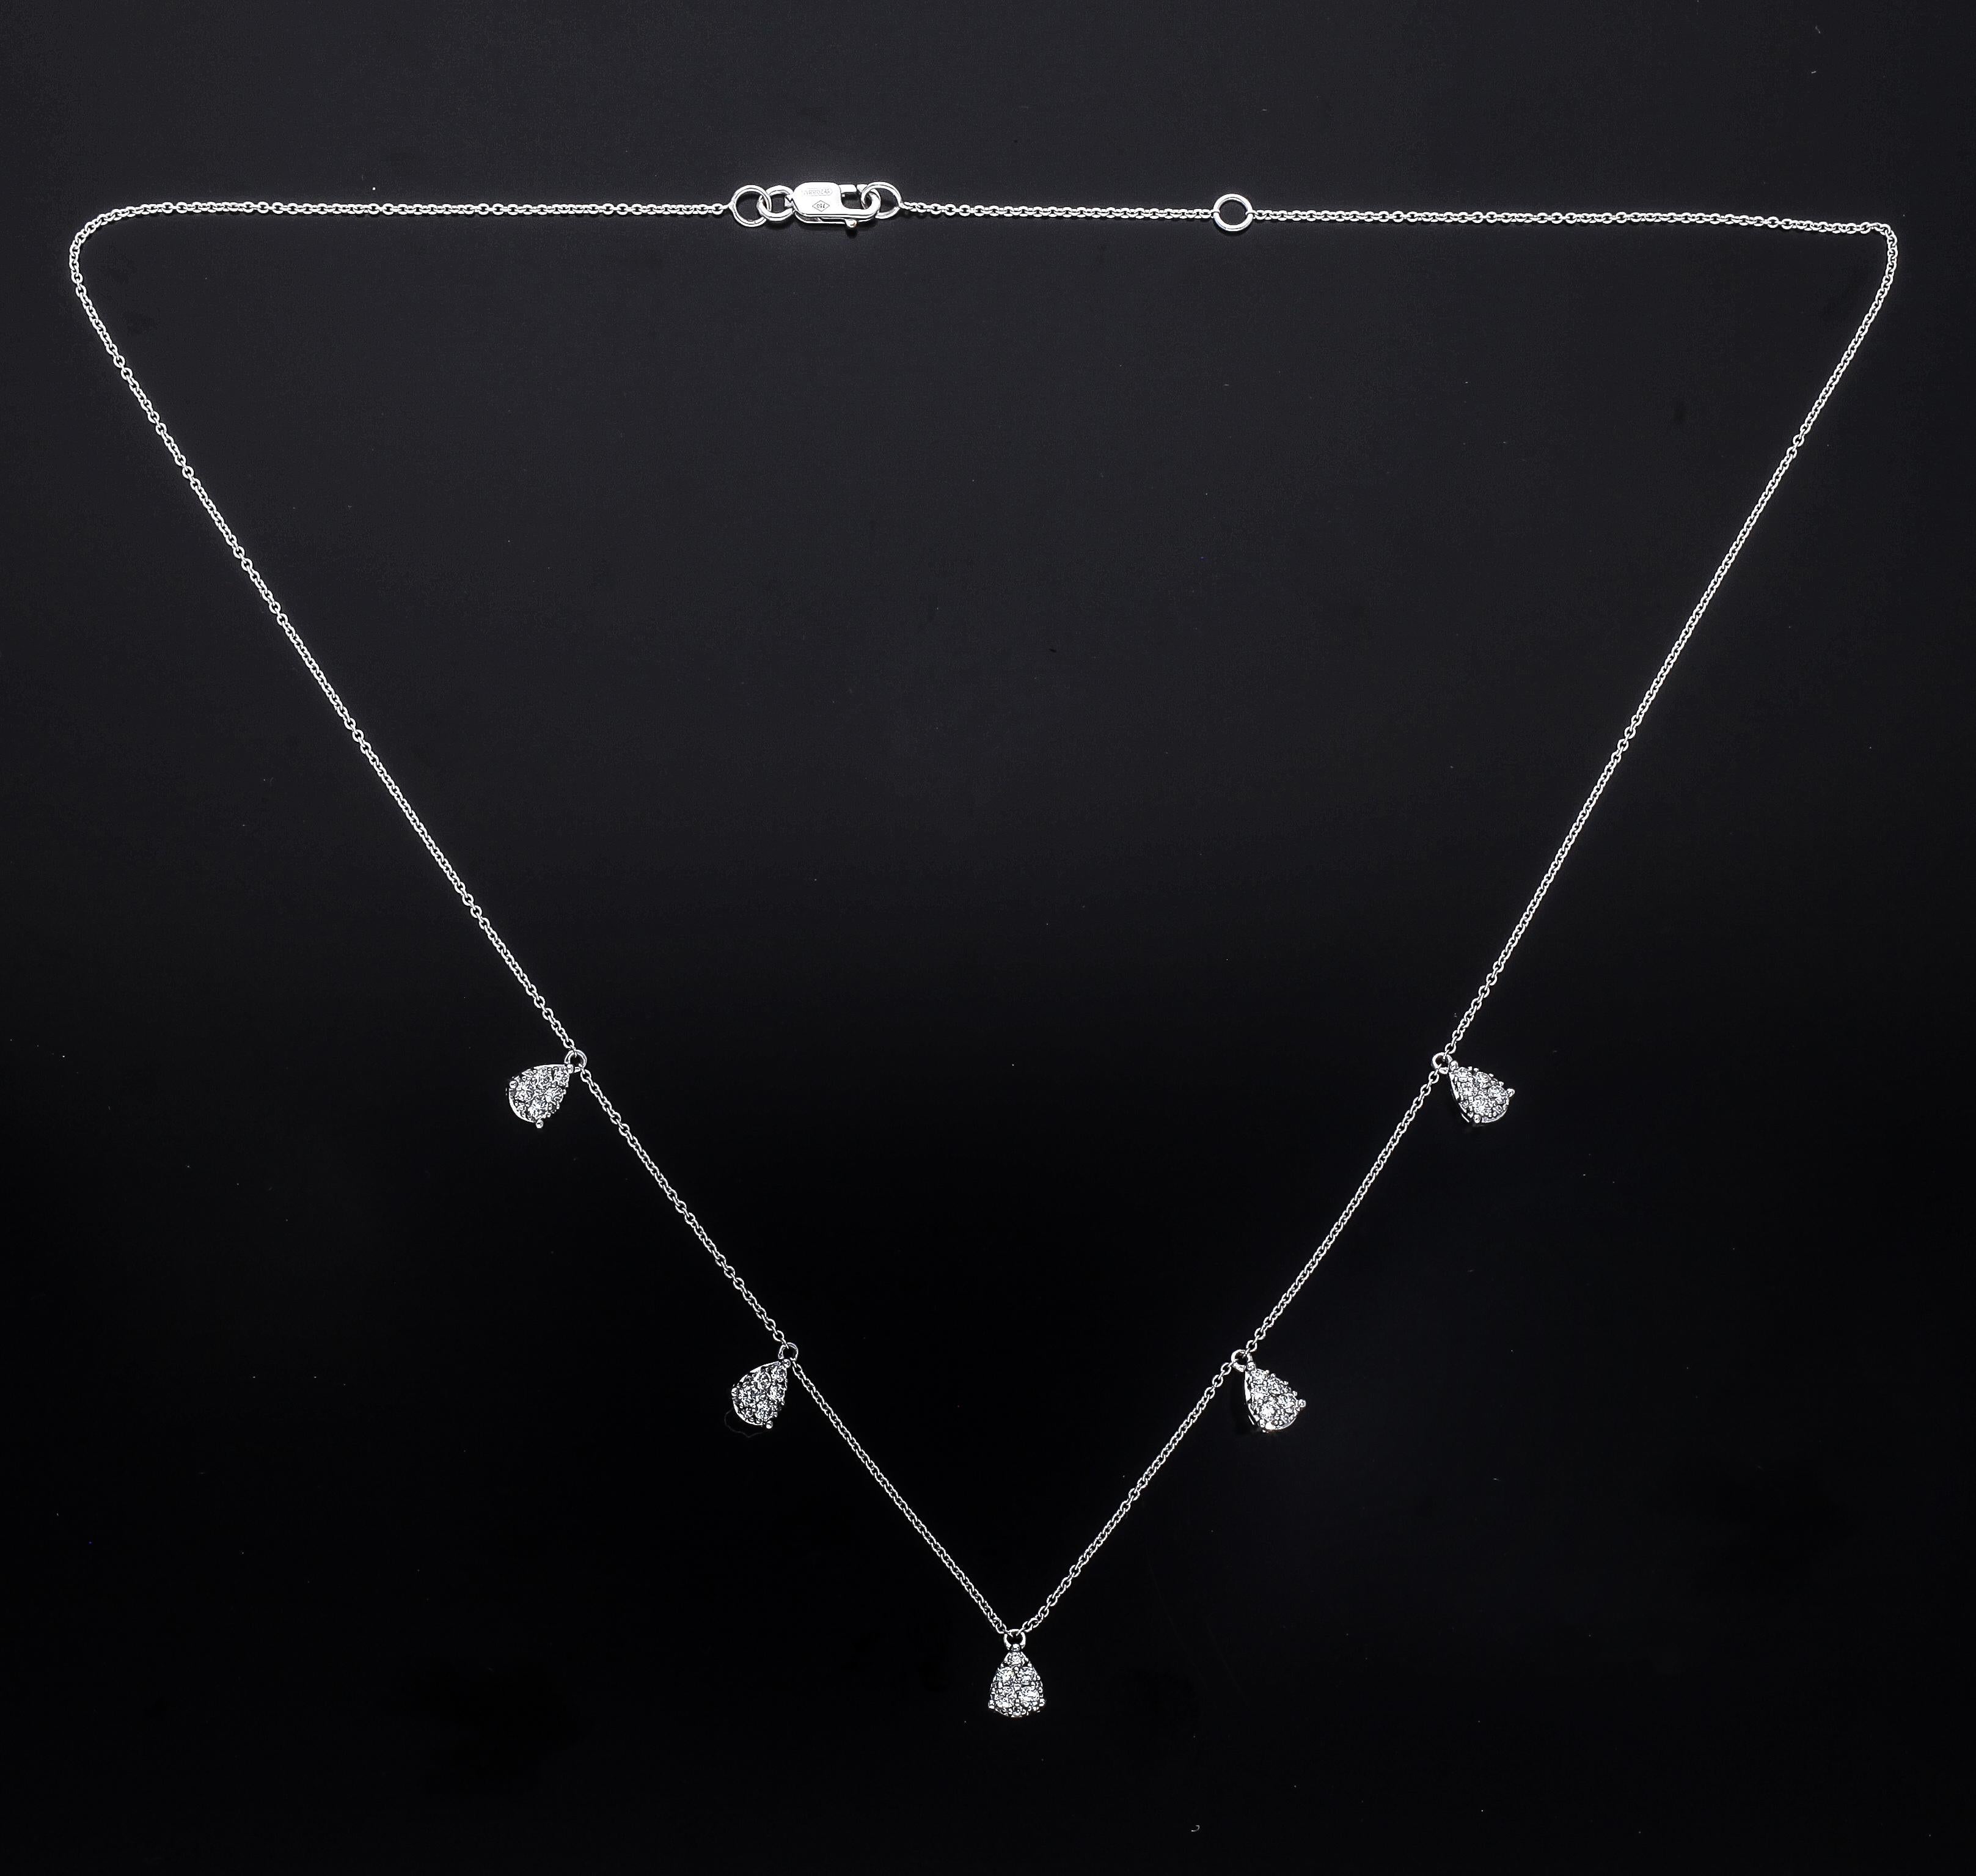 18 Karat White Gold Chain Necklace with Five Drop Pendant with Diamonds For Sale 6